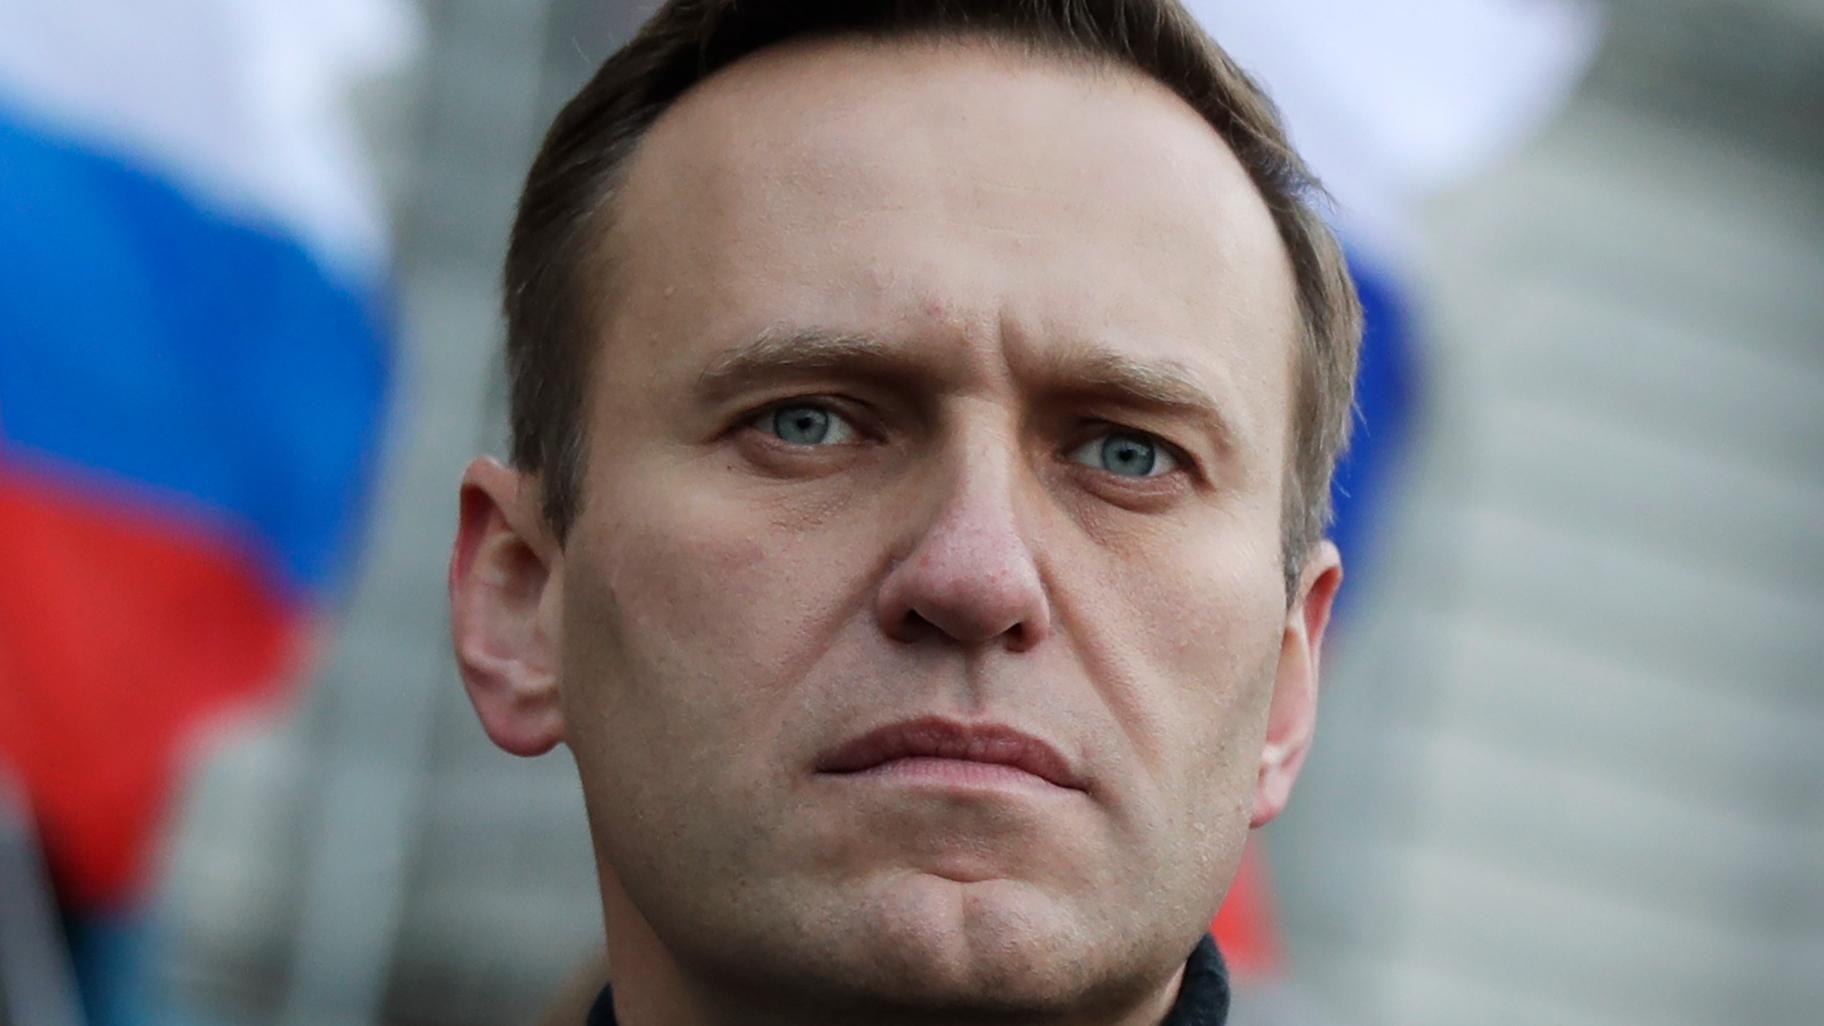 Russian opposition activist Alexei Navalny takes part in a march in memory of opposition leader Boris Nemtsov in Moscow, Russia on Feb. 29, 2020. (AP Photo / Pavel Golovkin, File)